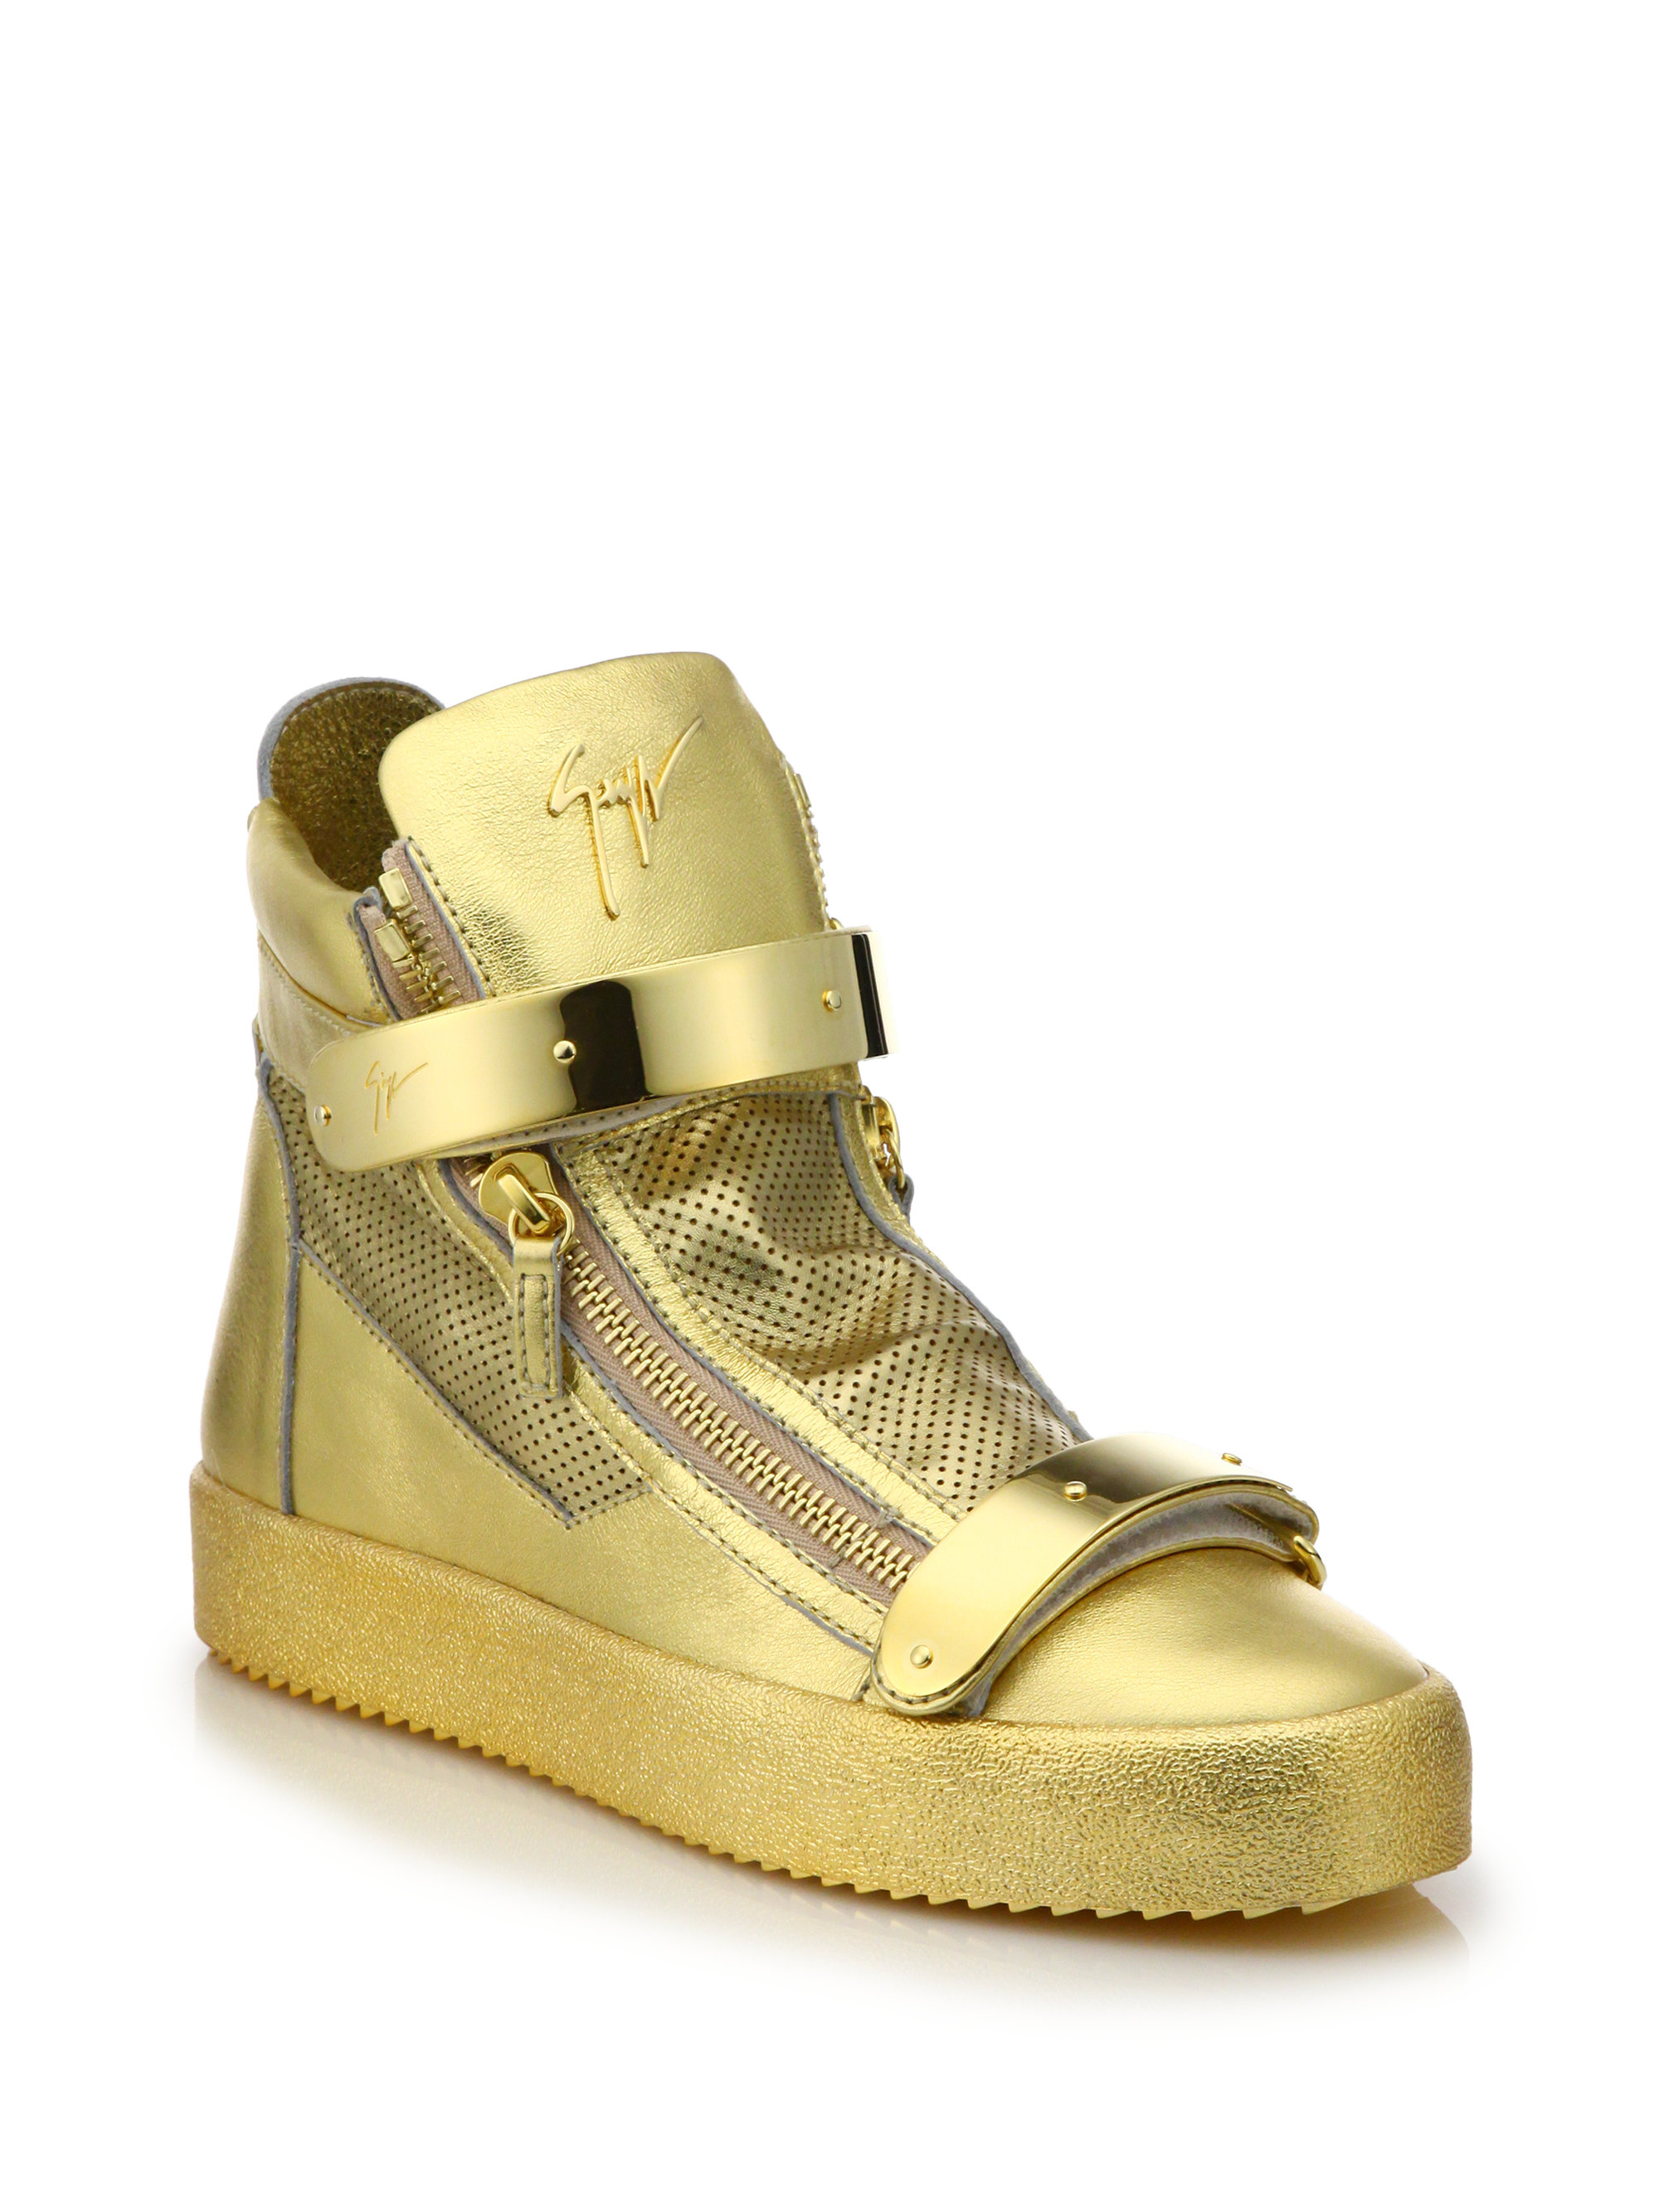 Zanotti Perforated Double Bar High-top Sneakers Gold (Metallic) for Men - Lyst